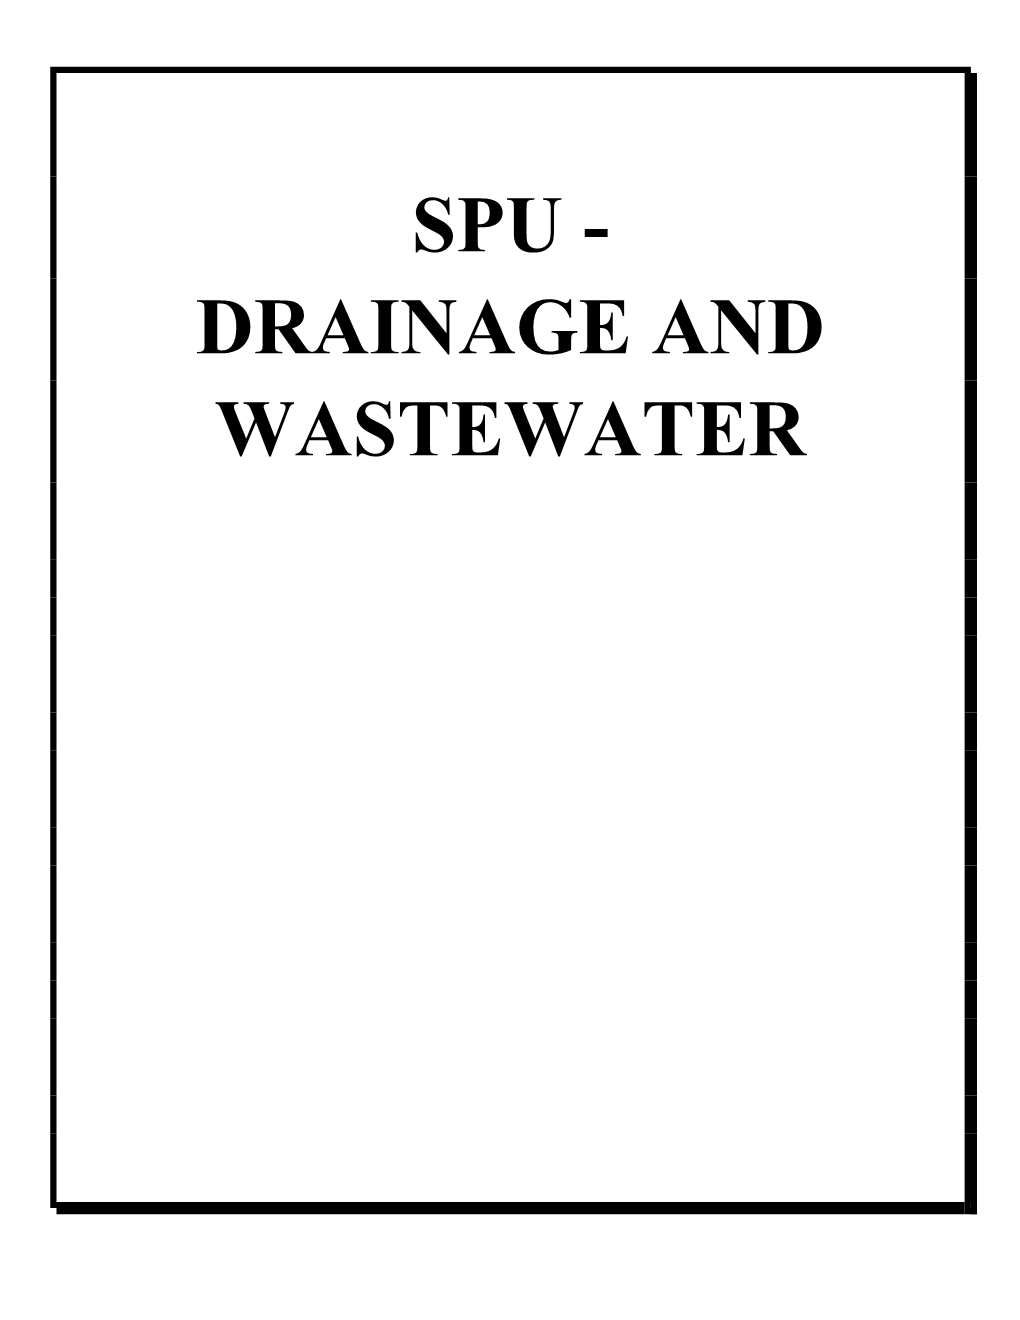 Seattle Public Utilities (SPU) Is Responsible for Maintaining the Network of Sewer and Drainage Systems Throughout the City of Seattle